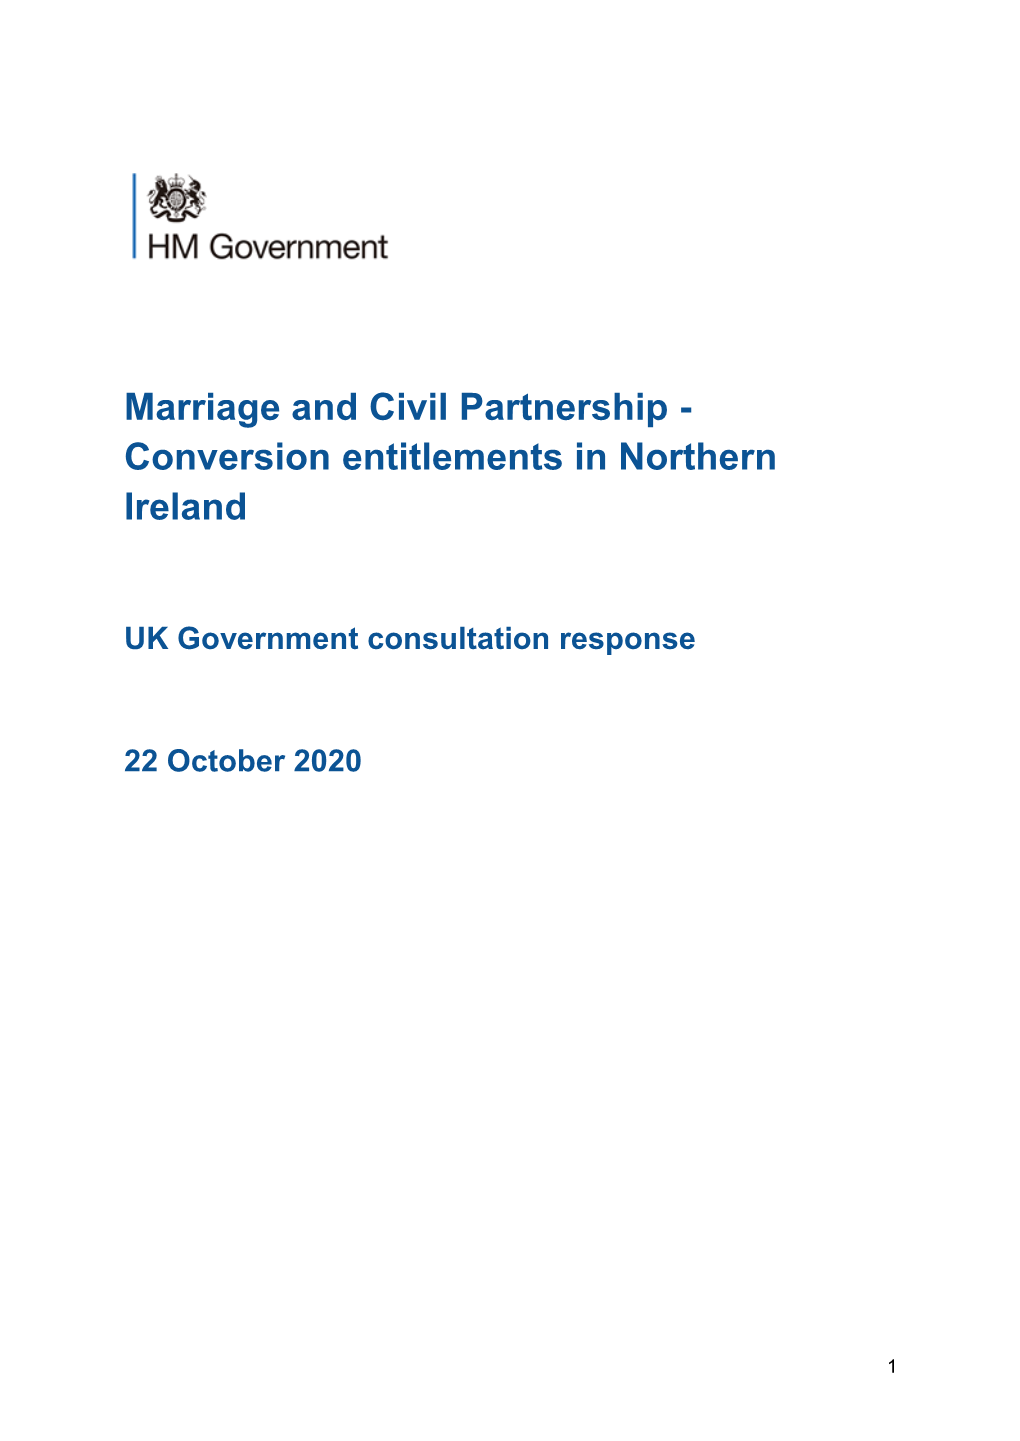 Marriage and Civil Partnership - Conversion Entitlements in Northern Ireland